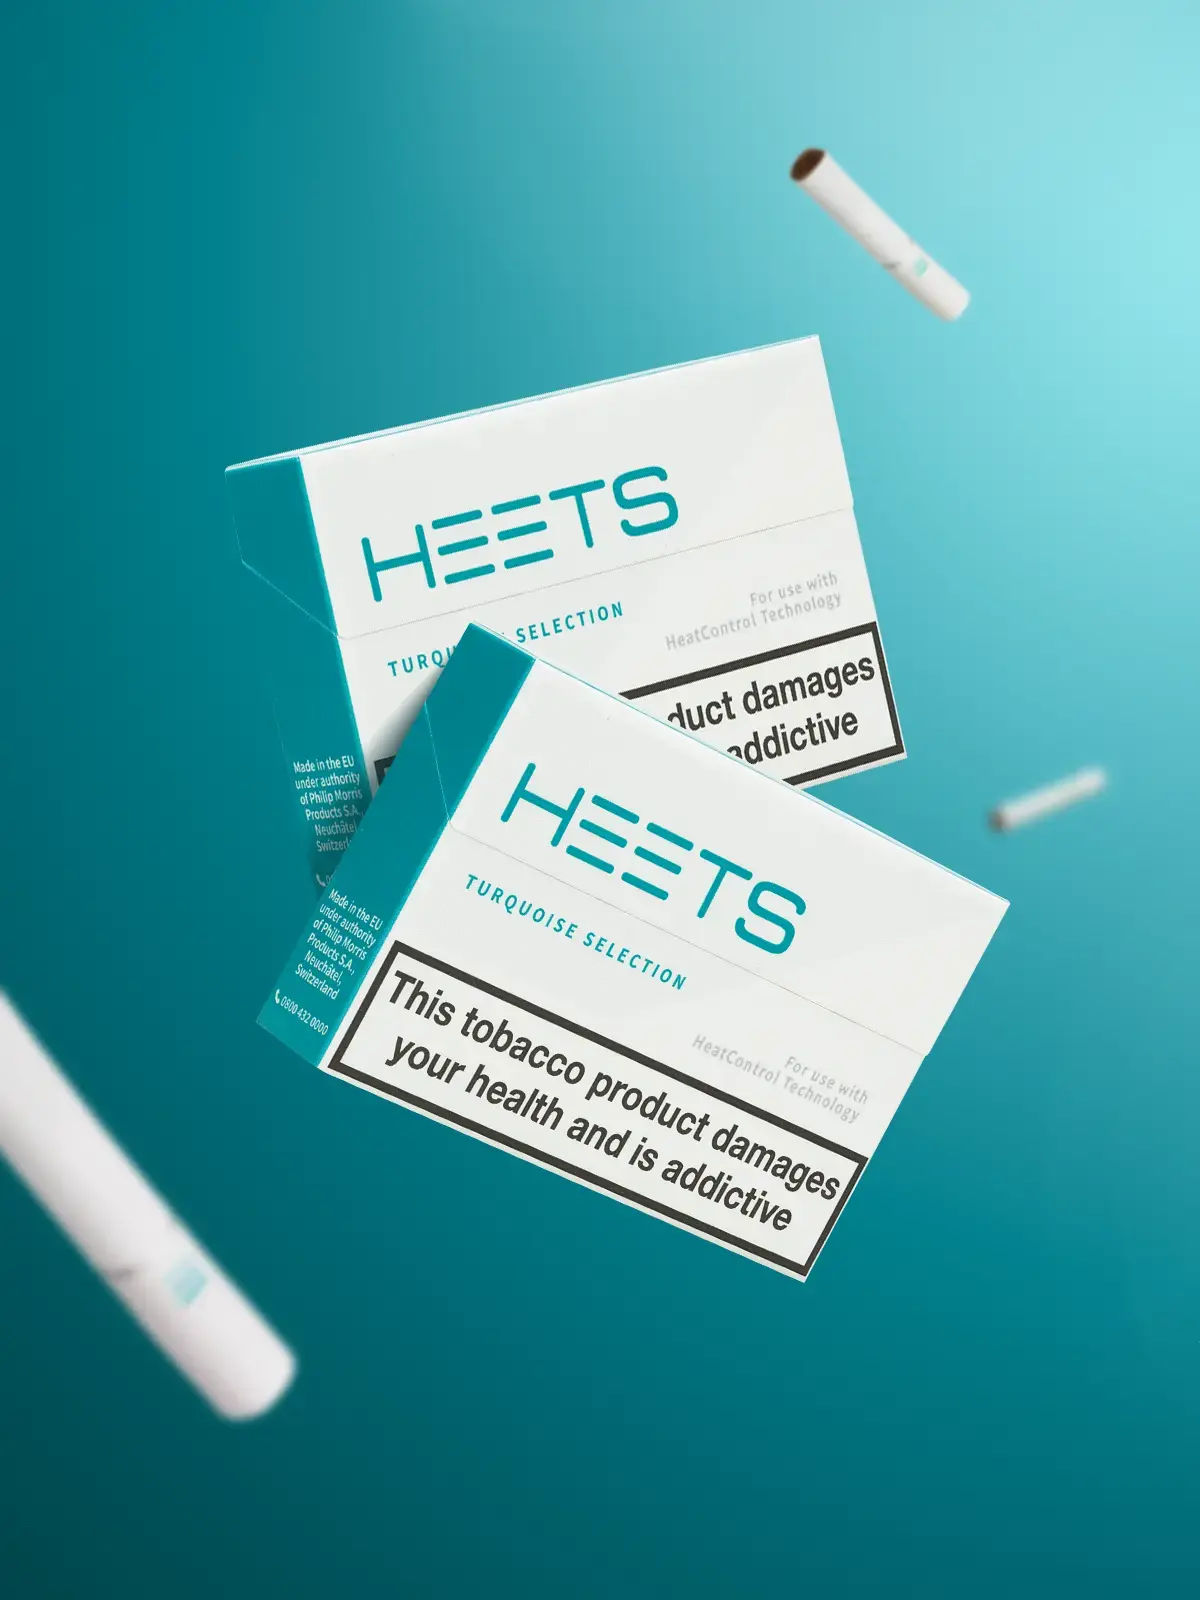 Two packs of IQOS Turquoise HEETS floating in front of turquoise coloured background